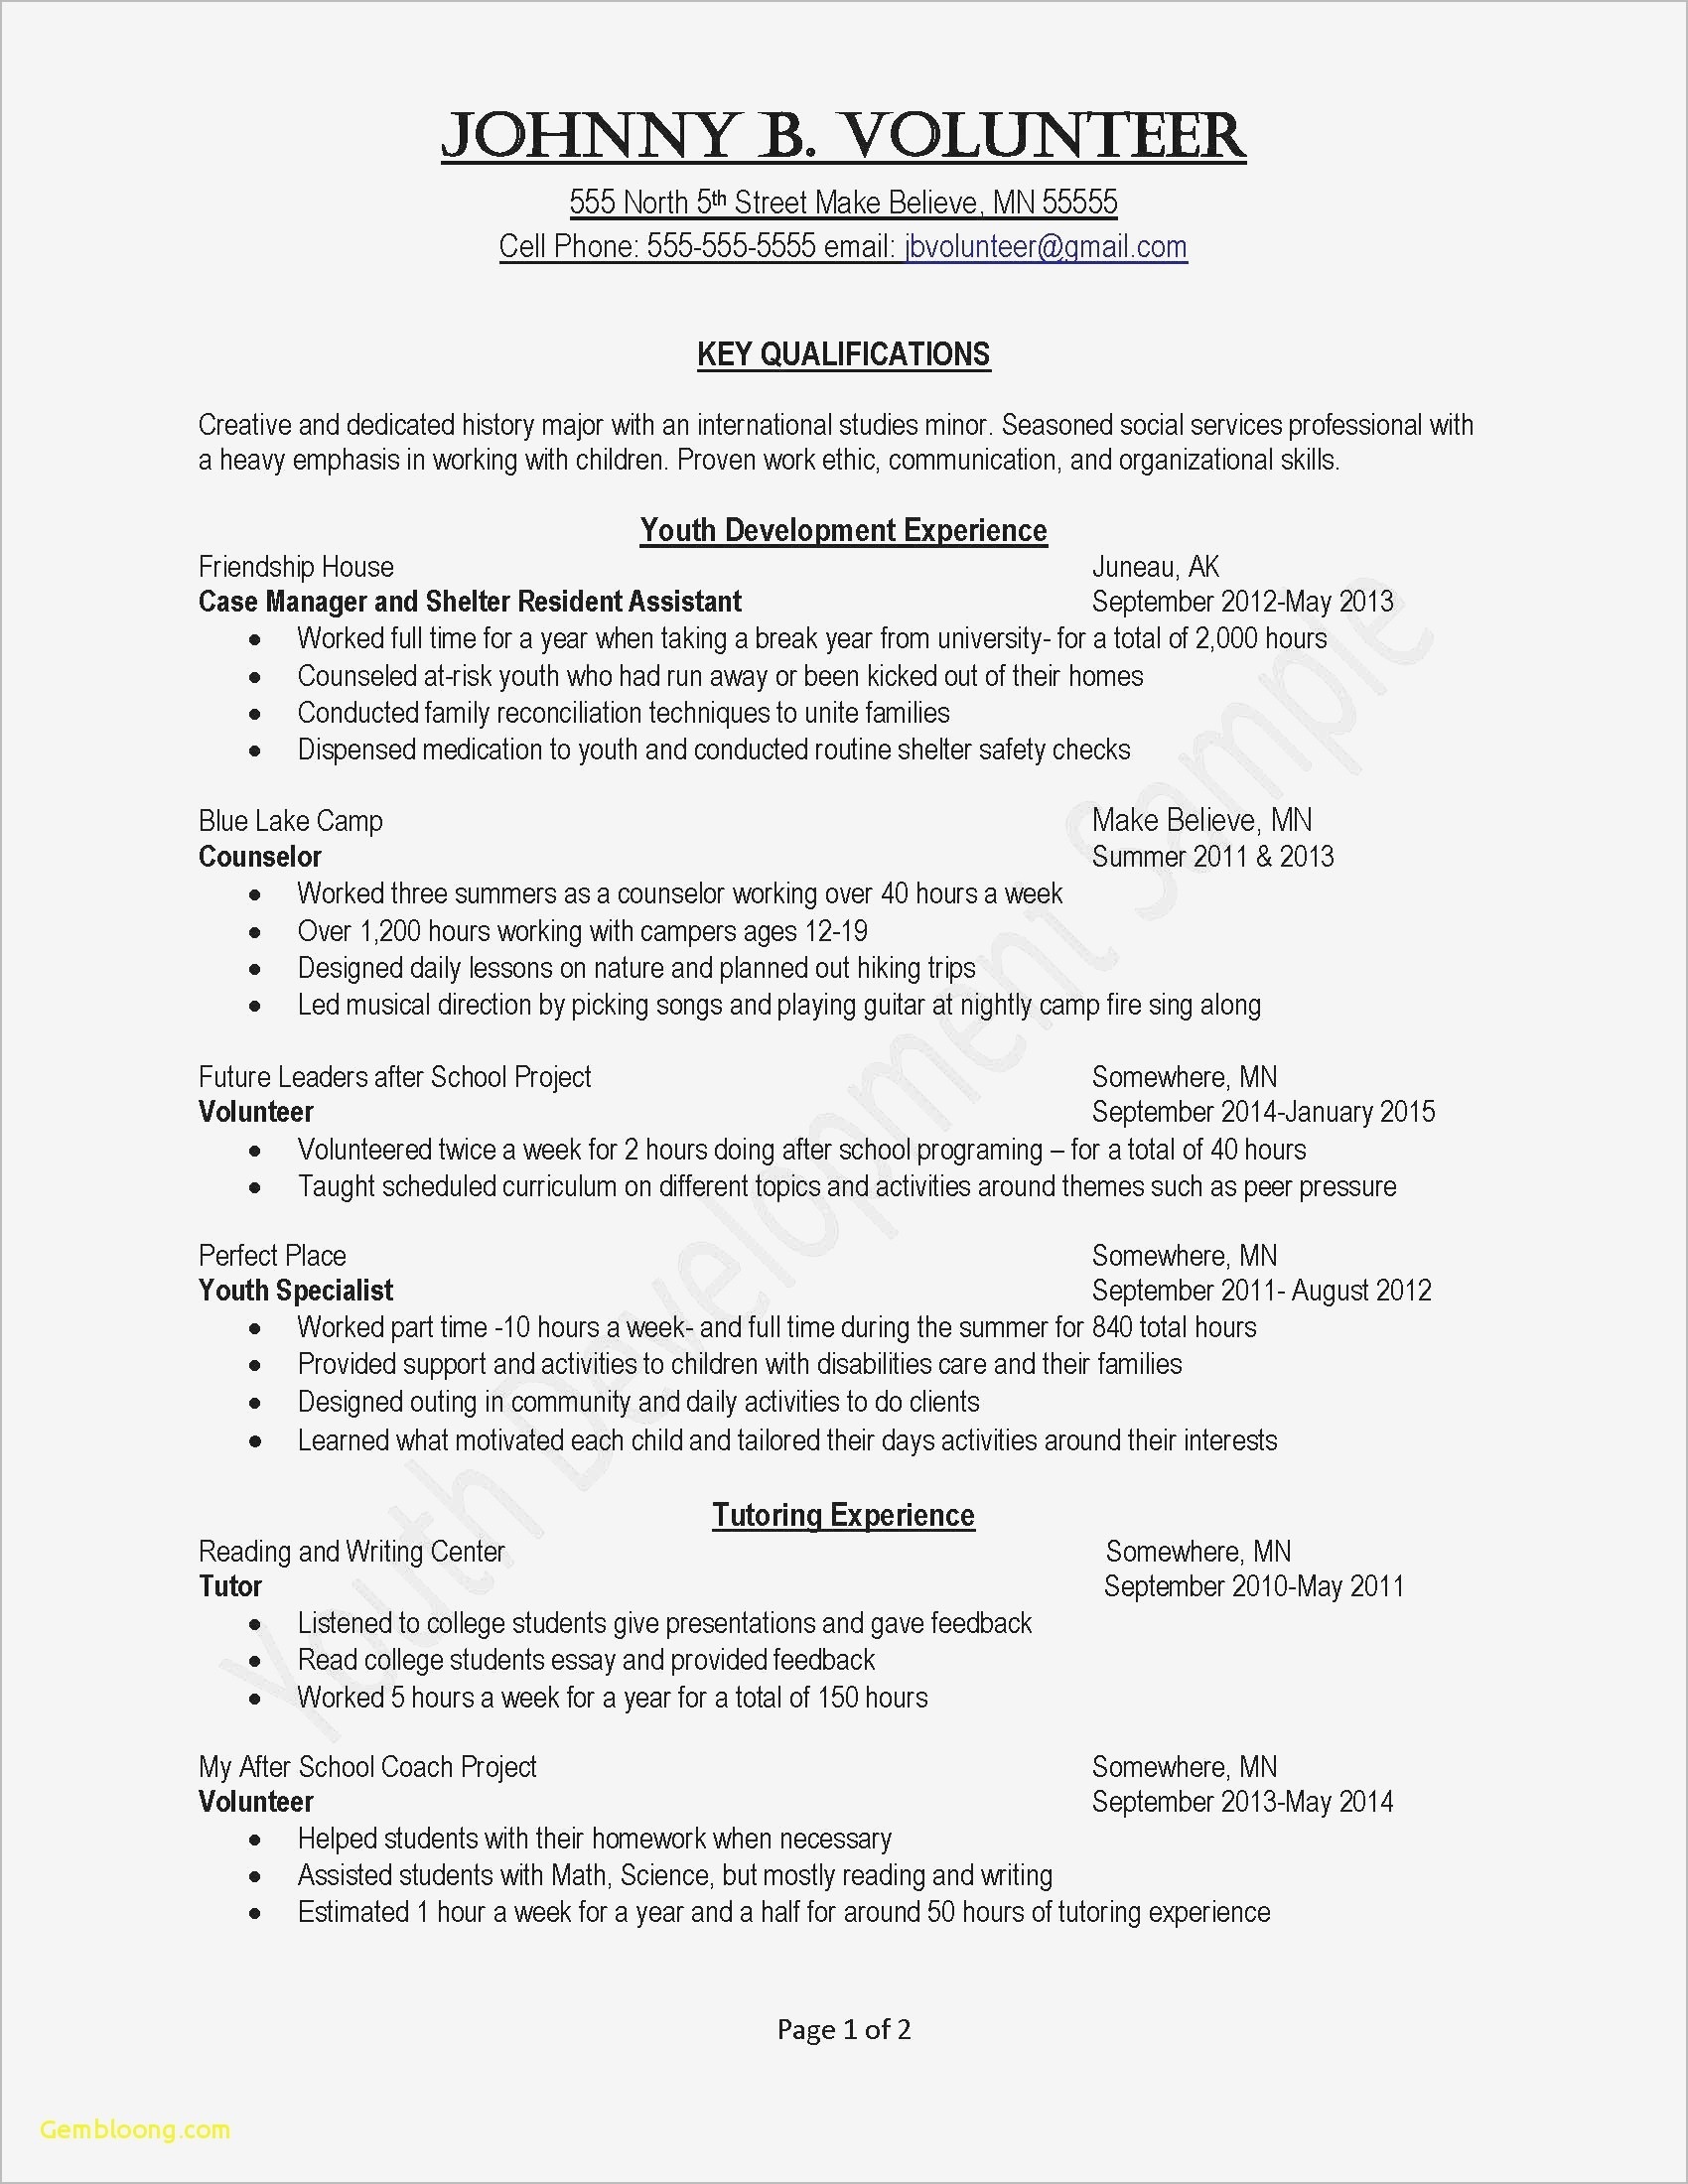 Simple Cover Letter Template Word - Job Fer Letter Template Us Copy Od Consultant Cover Letter Fungram